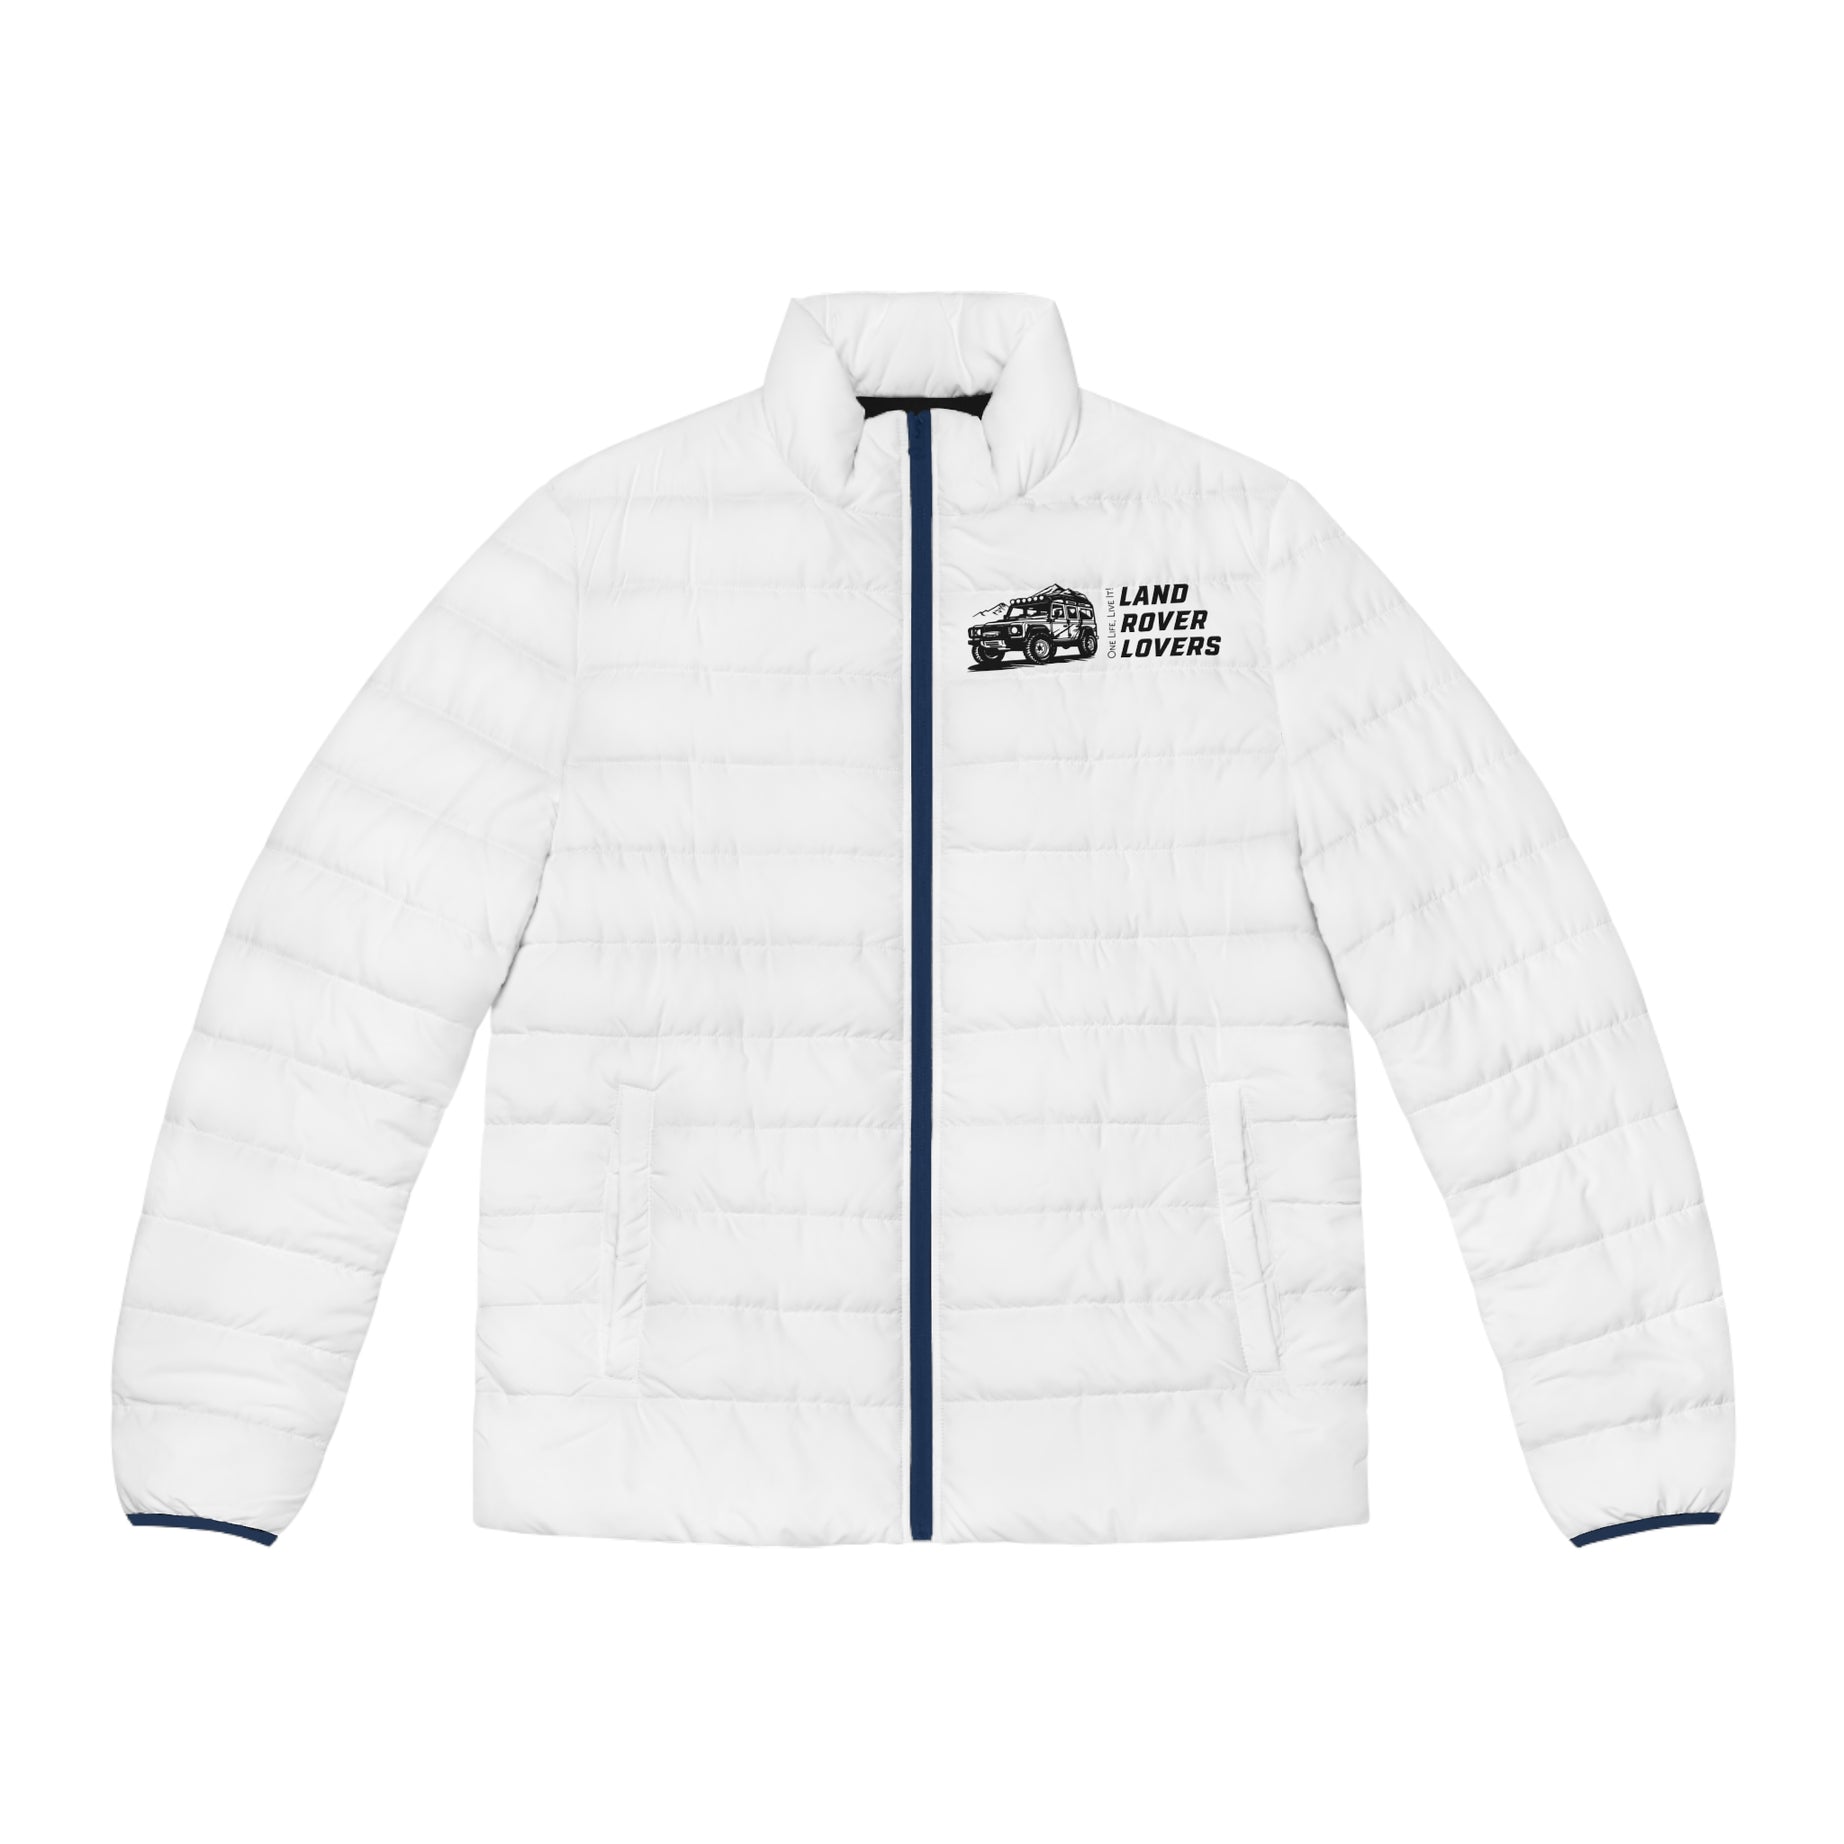 Land Rover Lovers Jacket